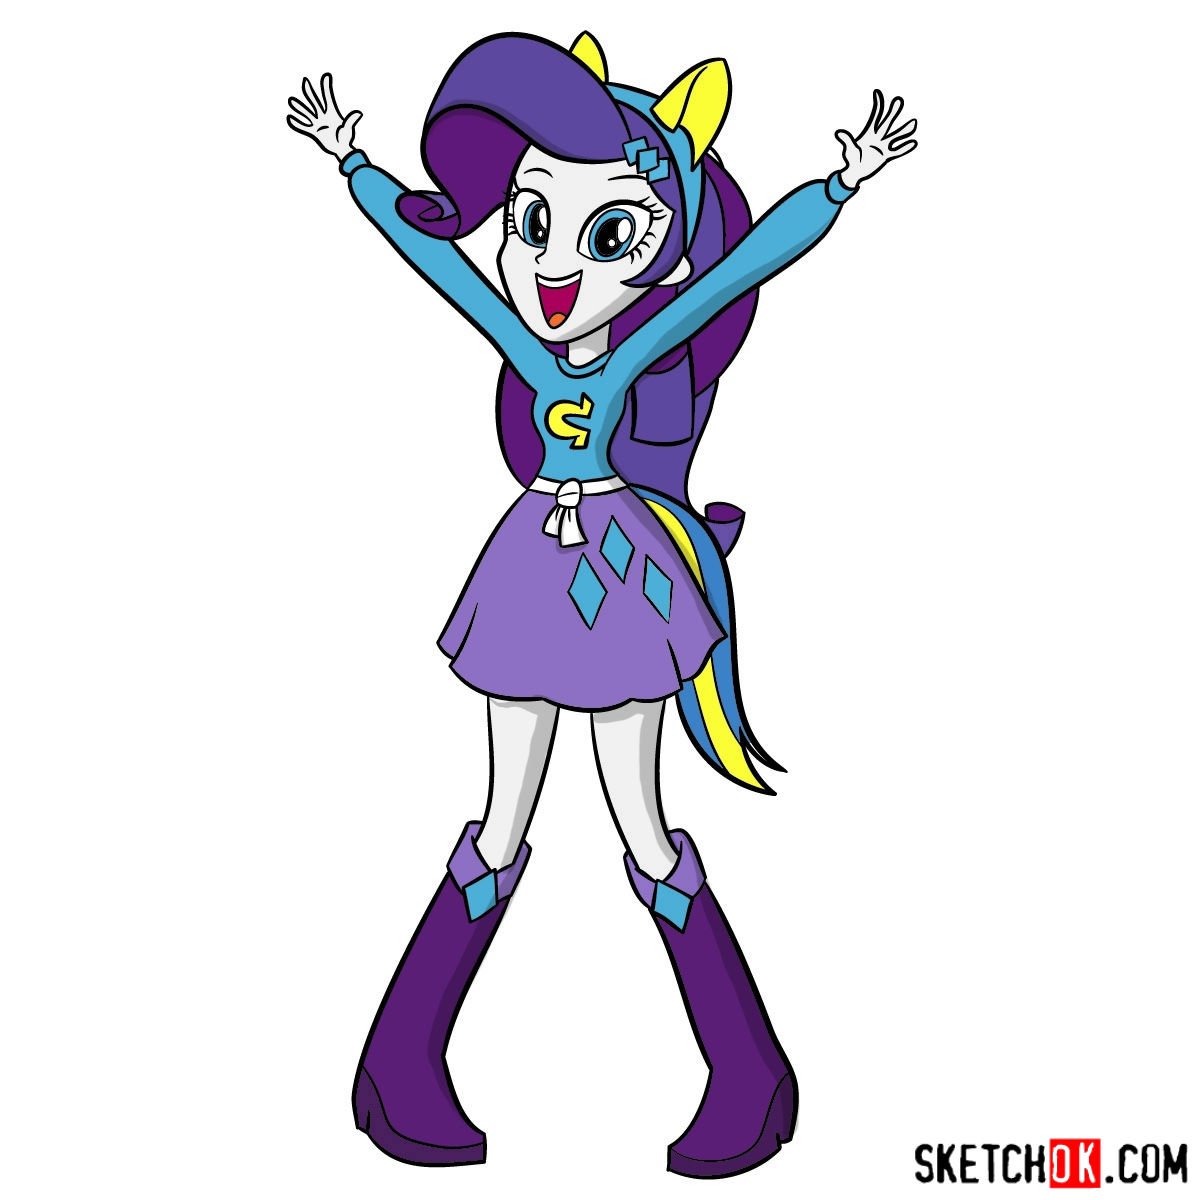 How to draw Rarity - Equestria Girls